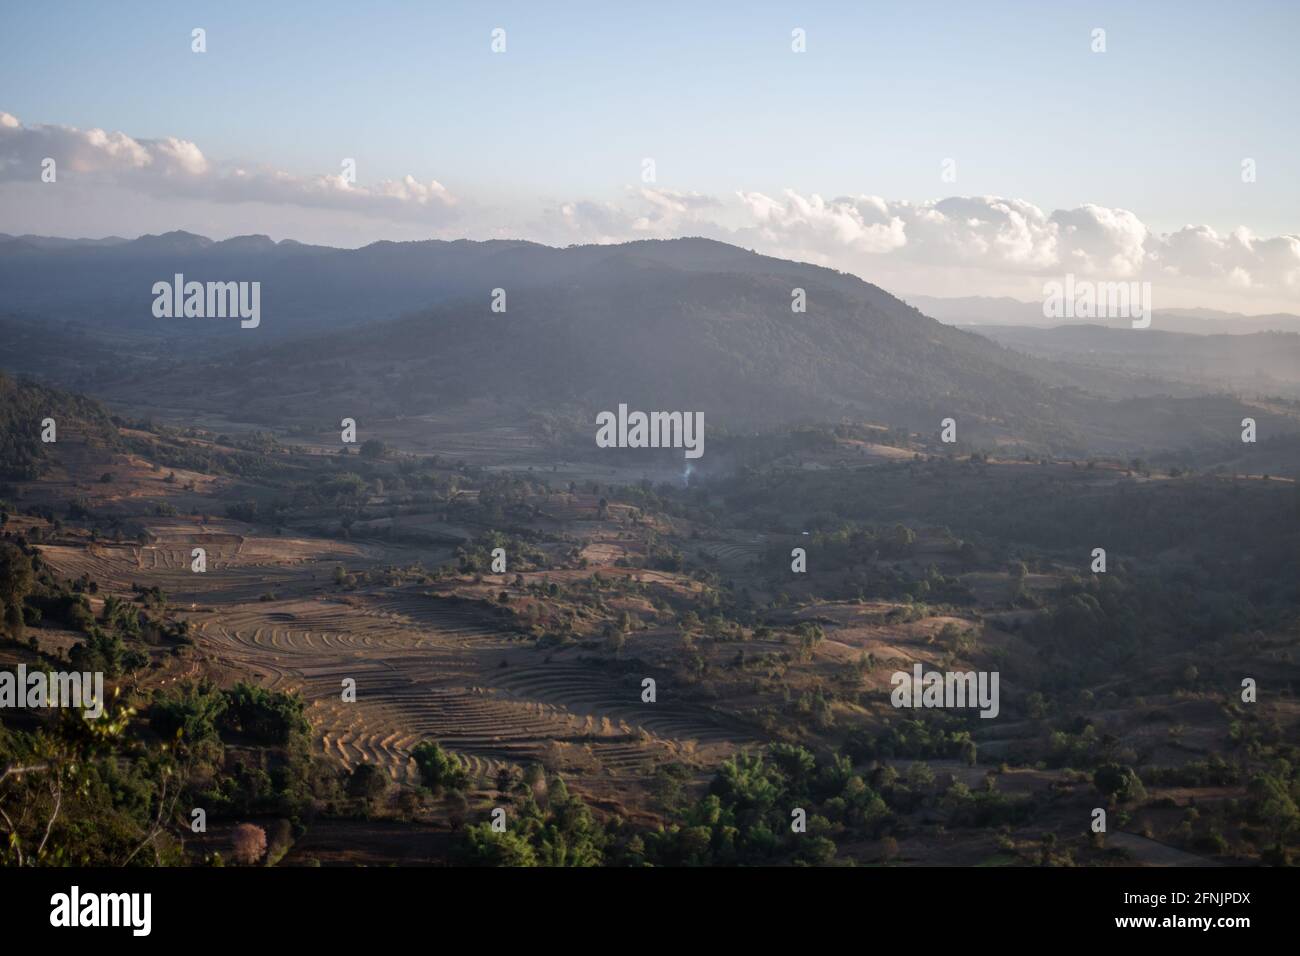 Viewpoint looking out over a beautiful valley landscape with terraced rice fields farm lands during evening sun between Kalaw and Inle Lake, Shan stat Stock Photo